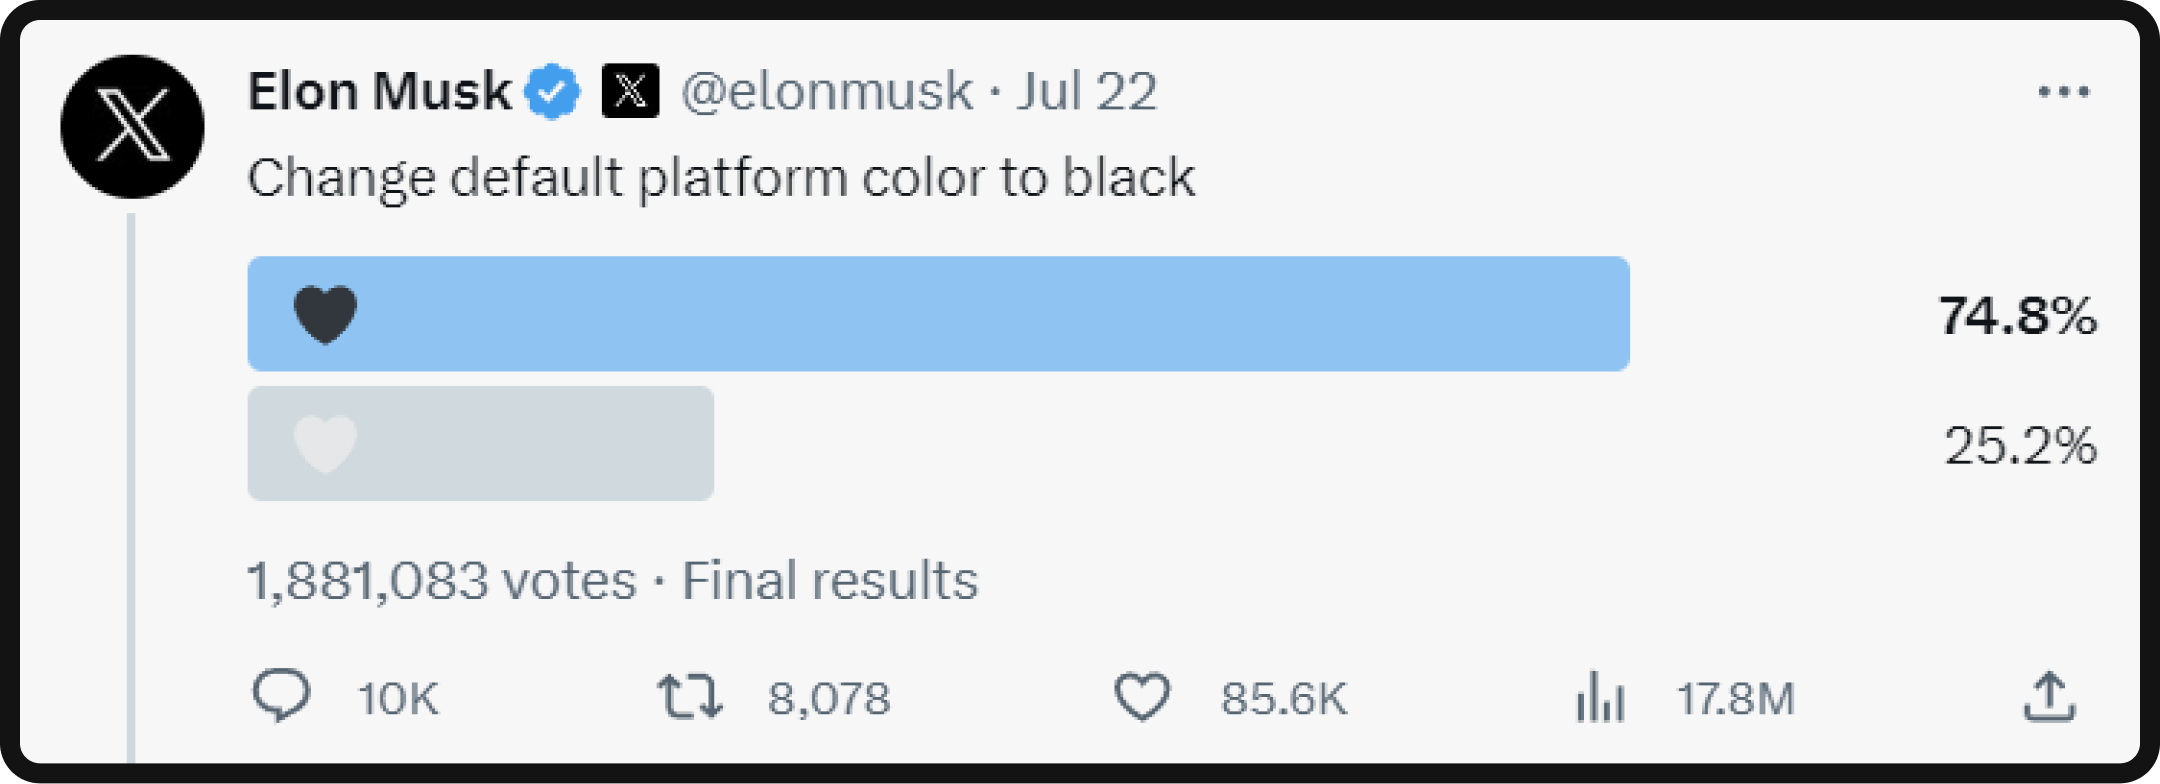 Elon's tweet asking if the default platform color should be changed to black, 74.8% users voted for black. 